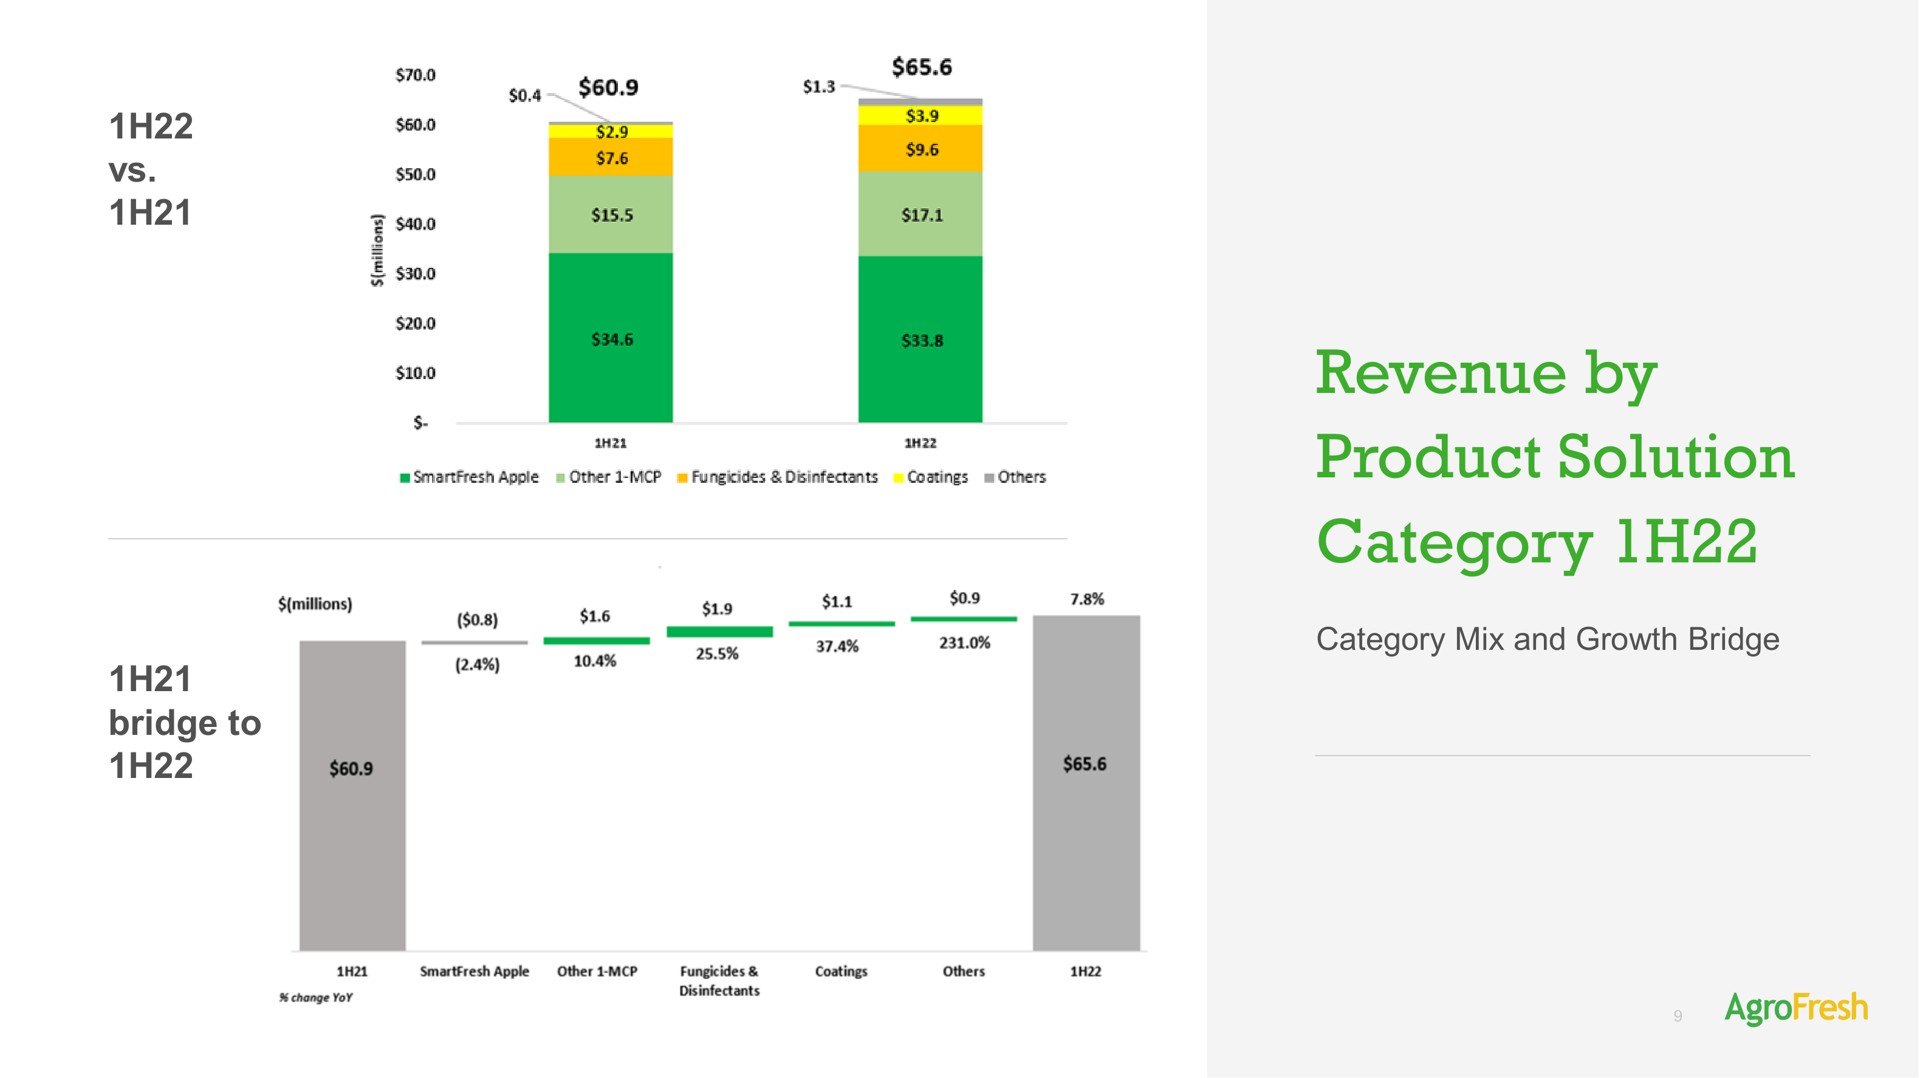 revenue by product solution category a bridge to | AgroFresh